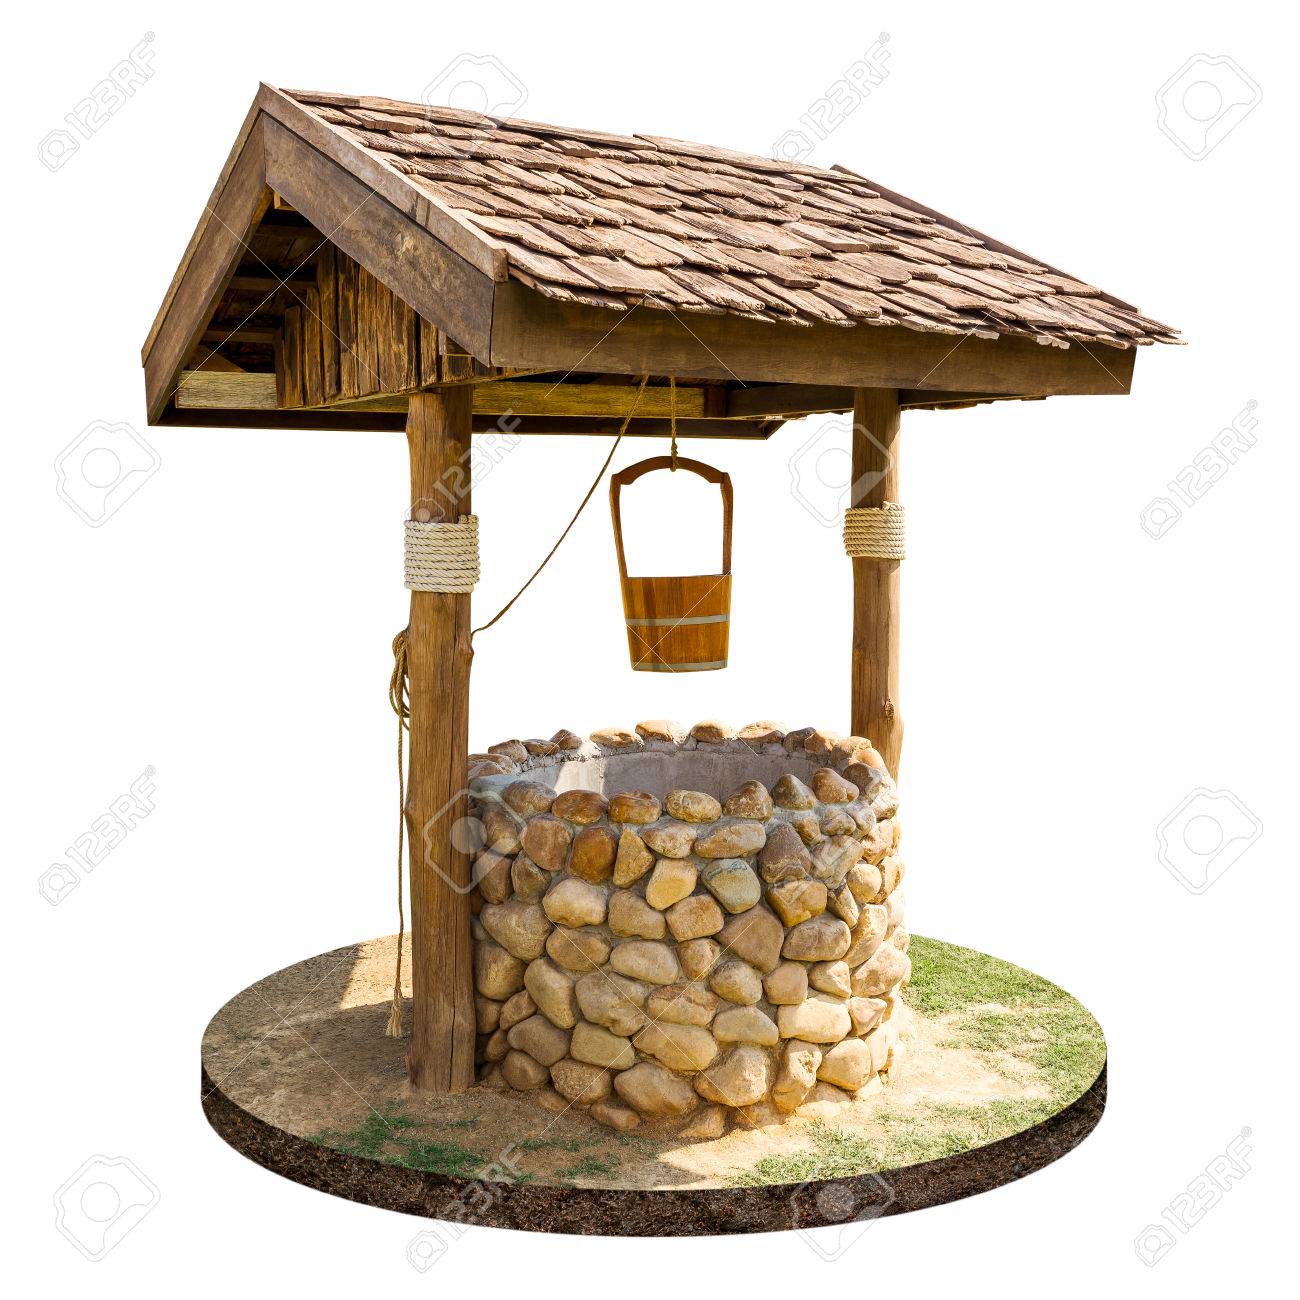 Ancient Artesian Well And Wooden Roof With Hanging Wood Bucket